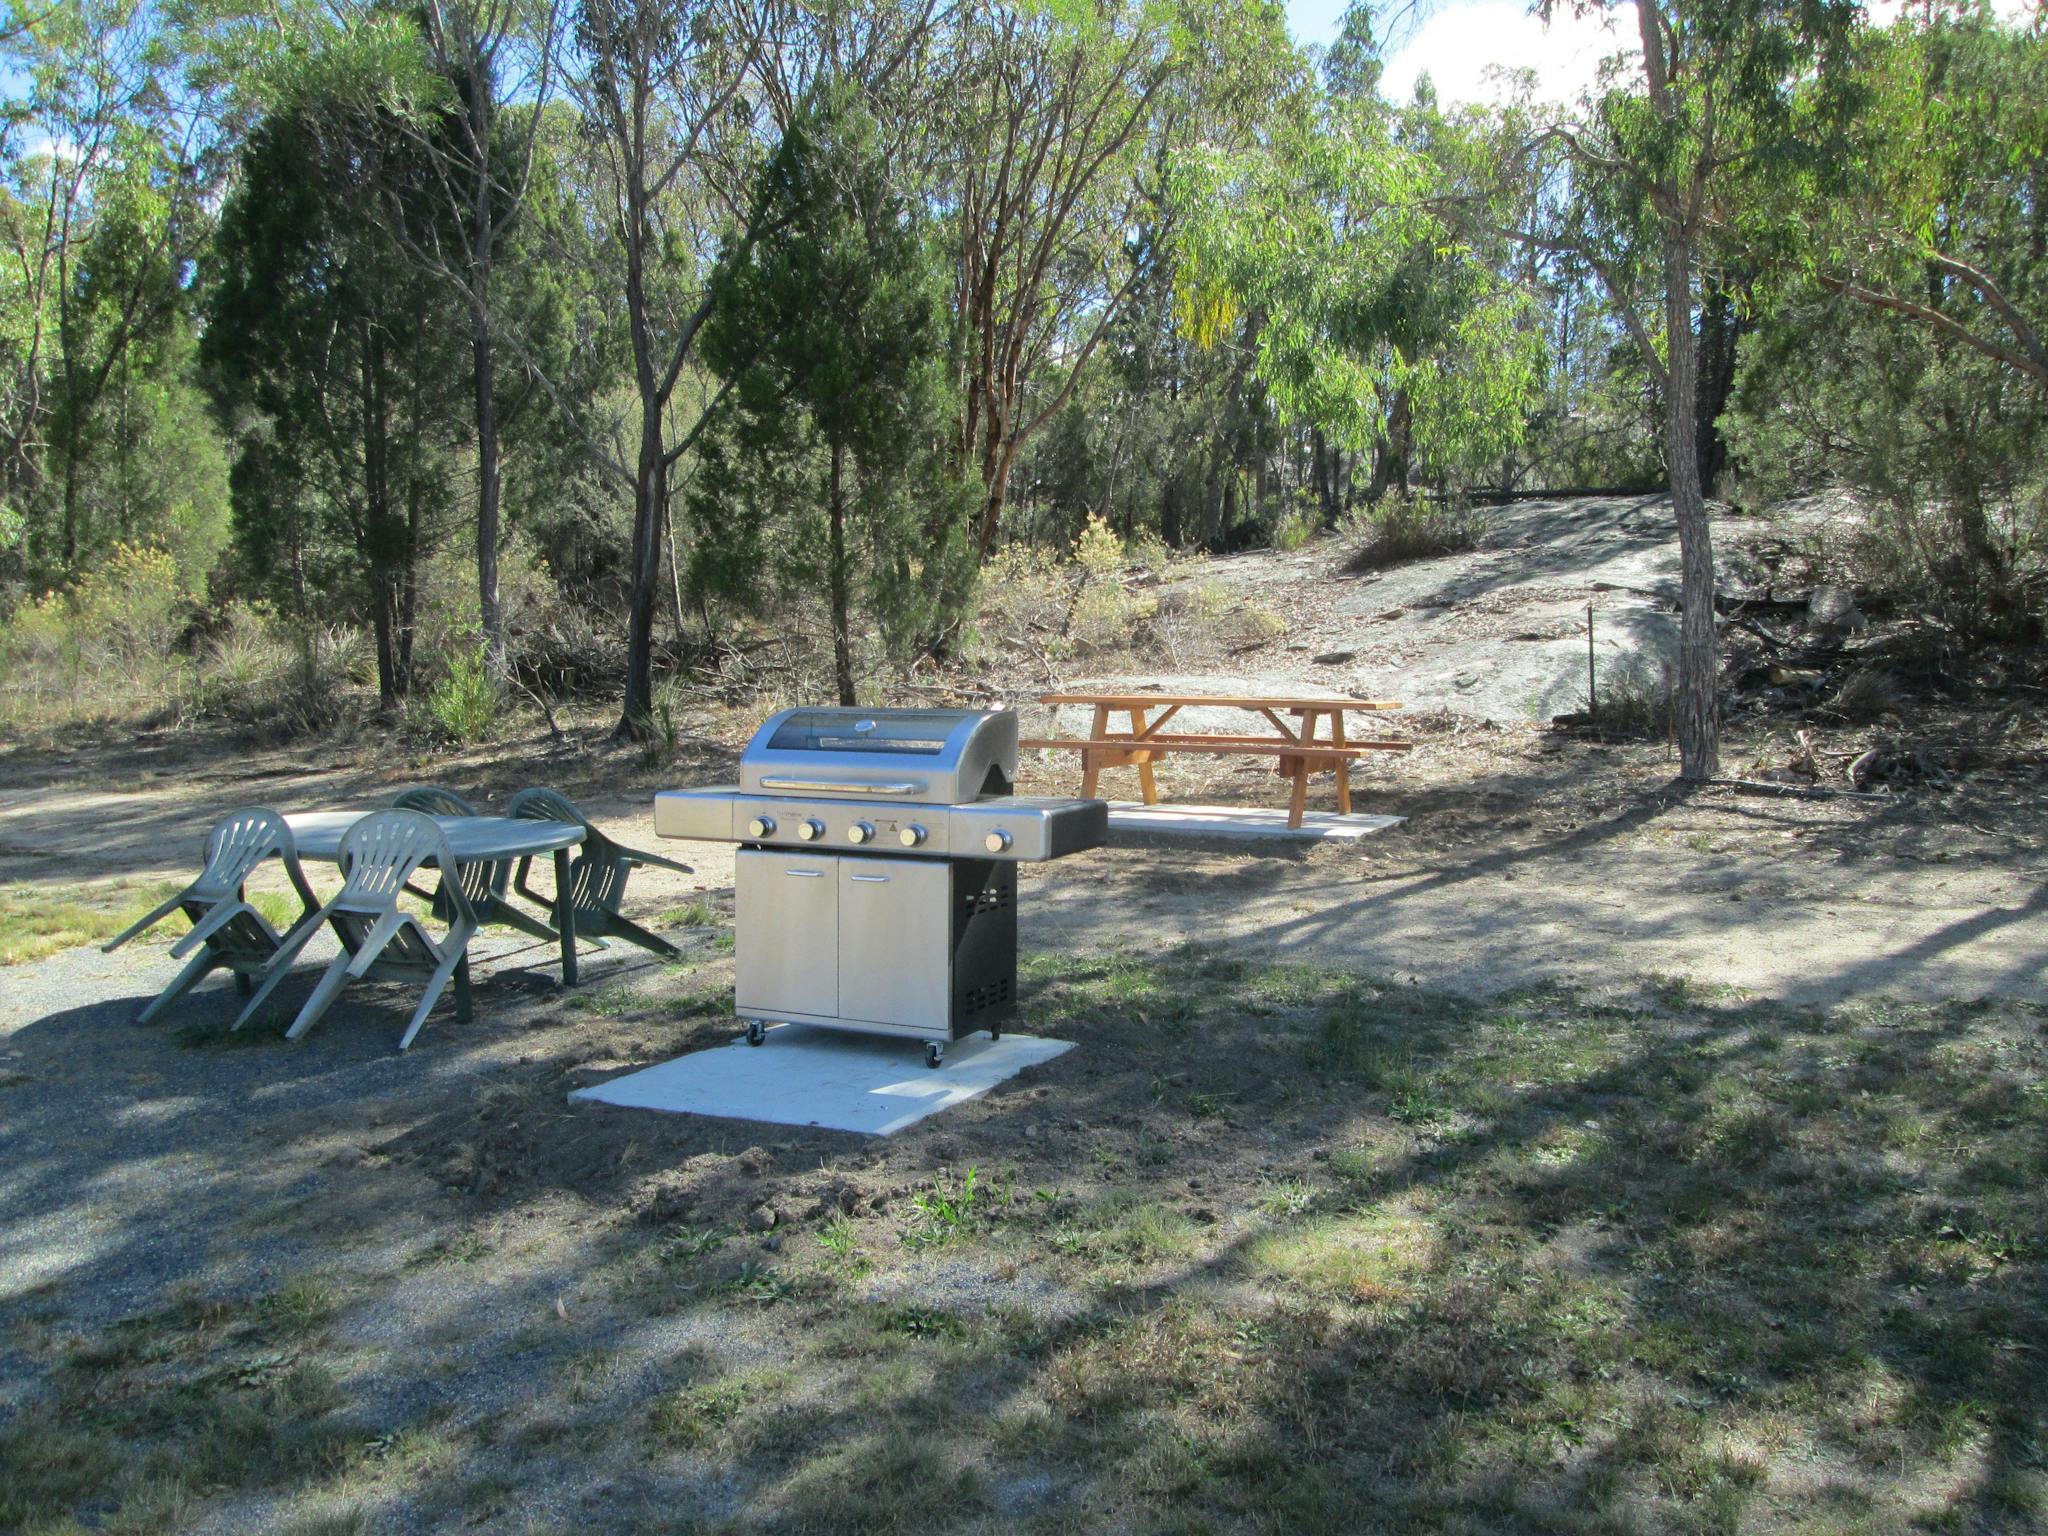 Shared BBQ and picnic area